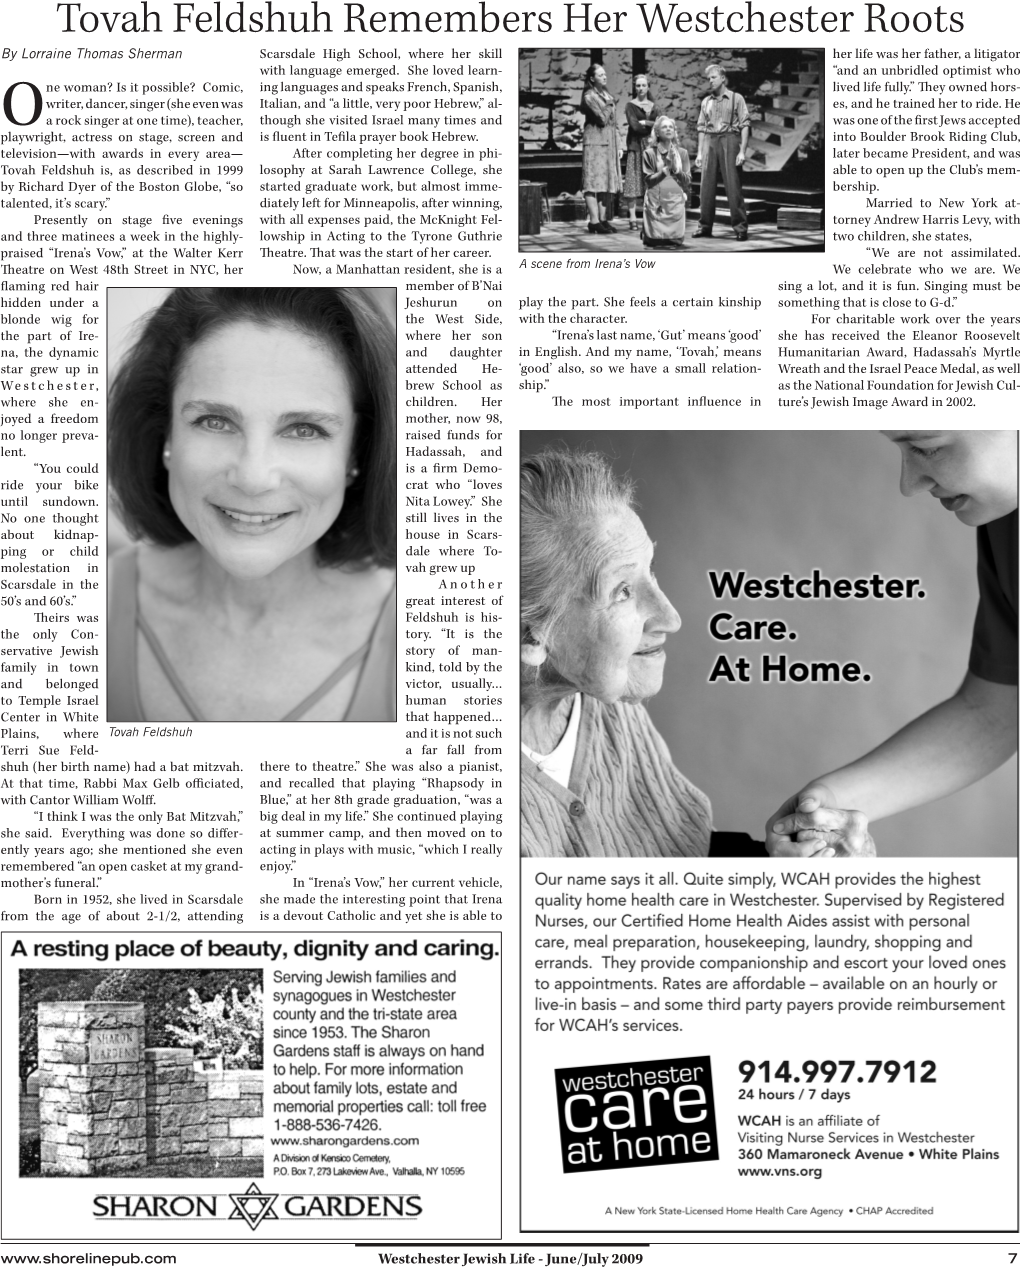 Tovah Feldshuh Remembers Her Westchester Roots